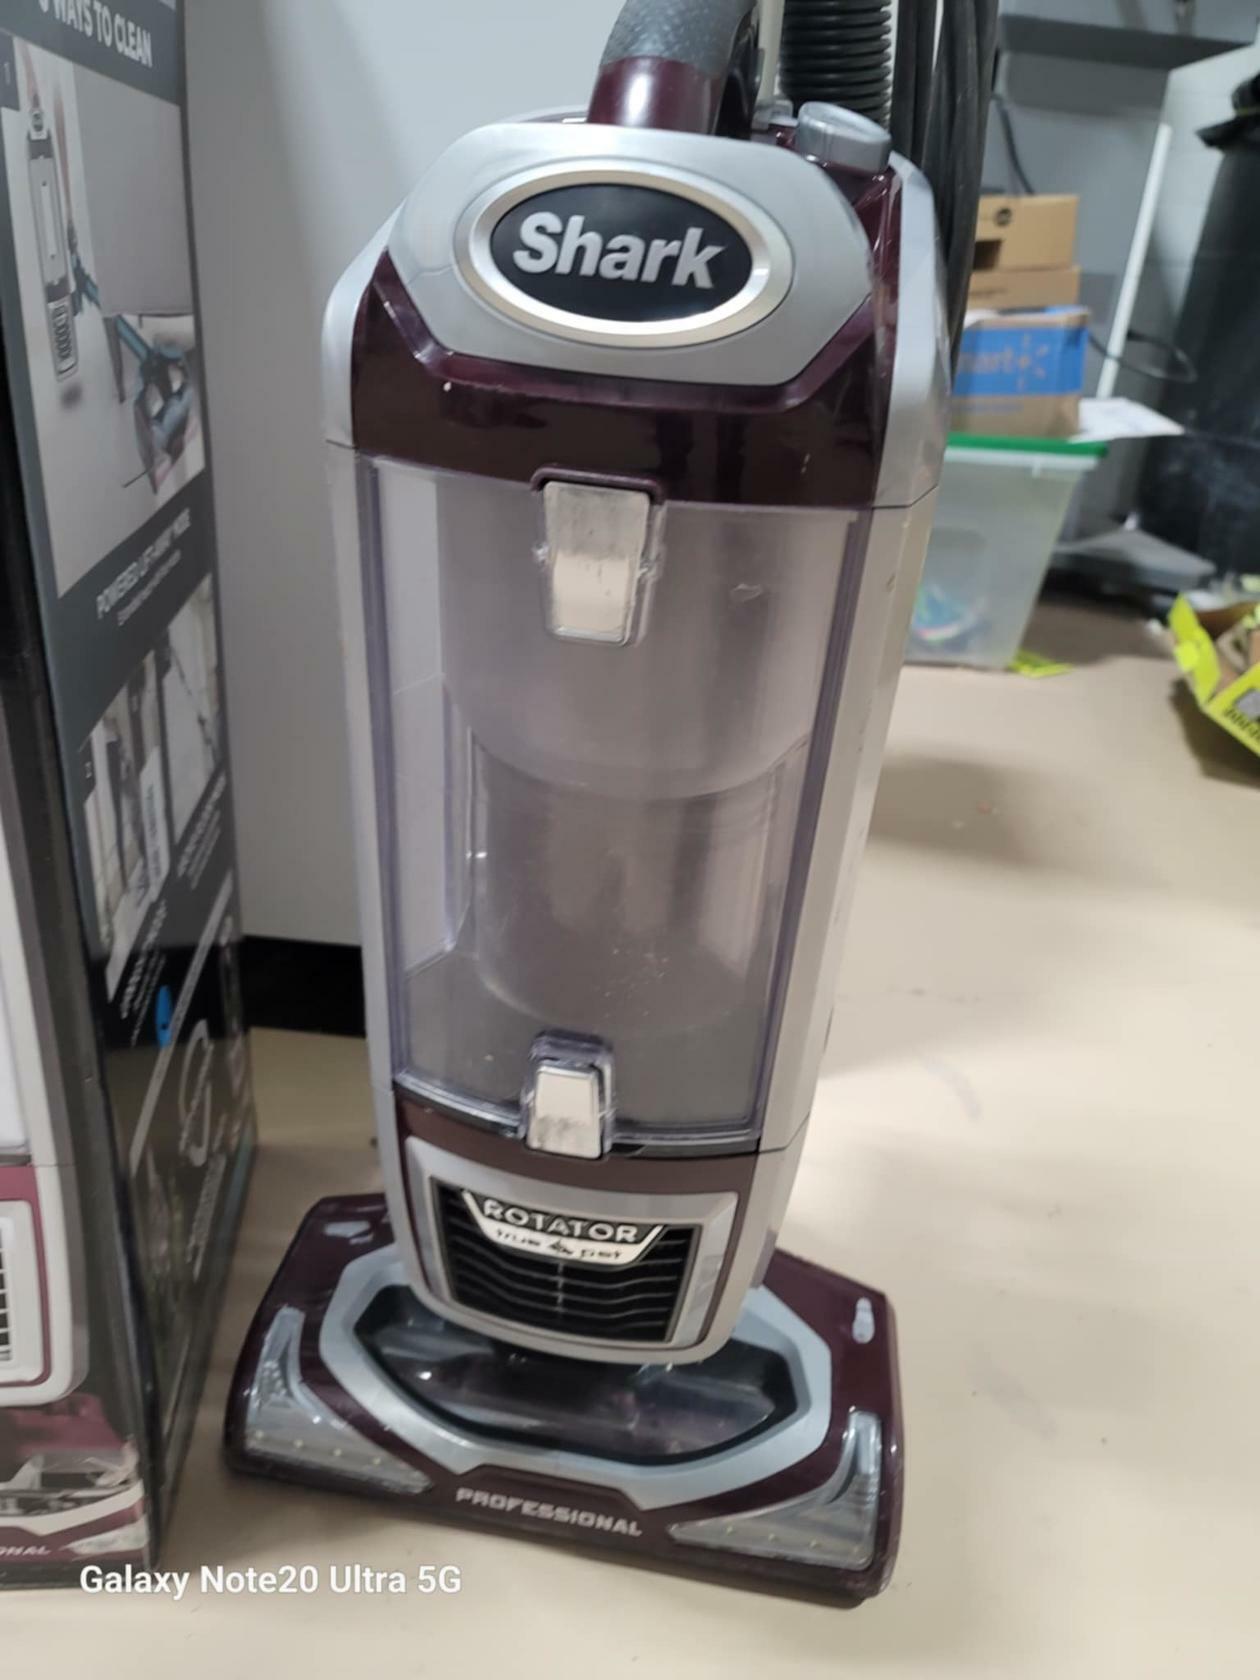 Shark Rotator Powered Lift-Away Deluxe Vacuum Color: Brass/Silver - Like New